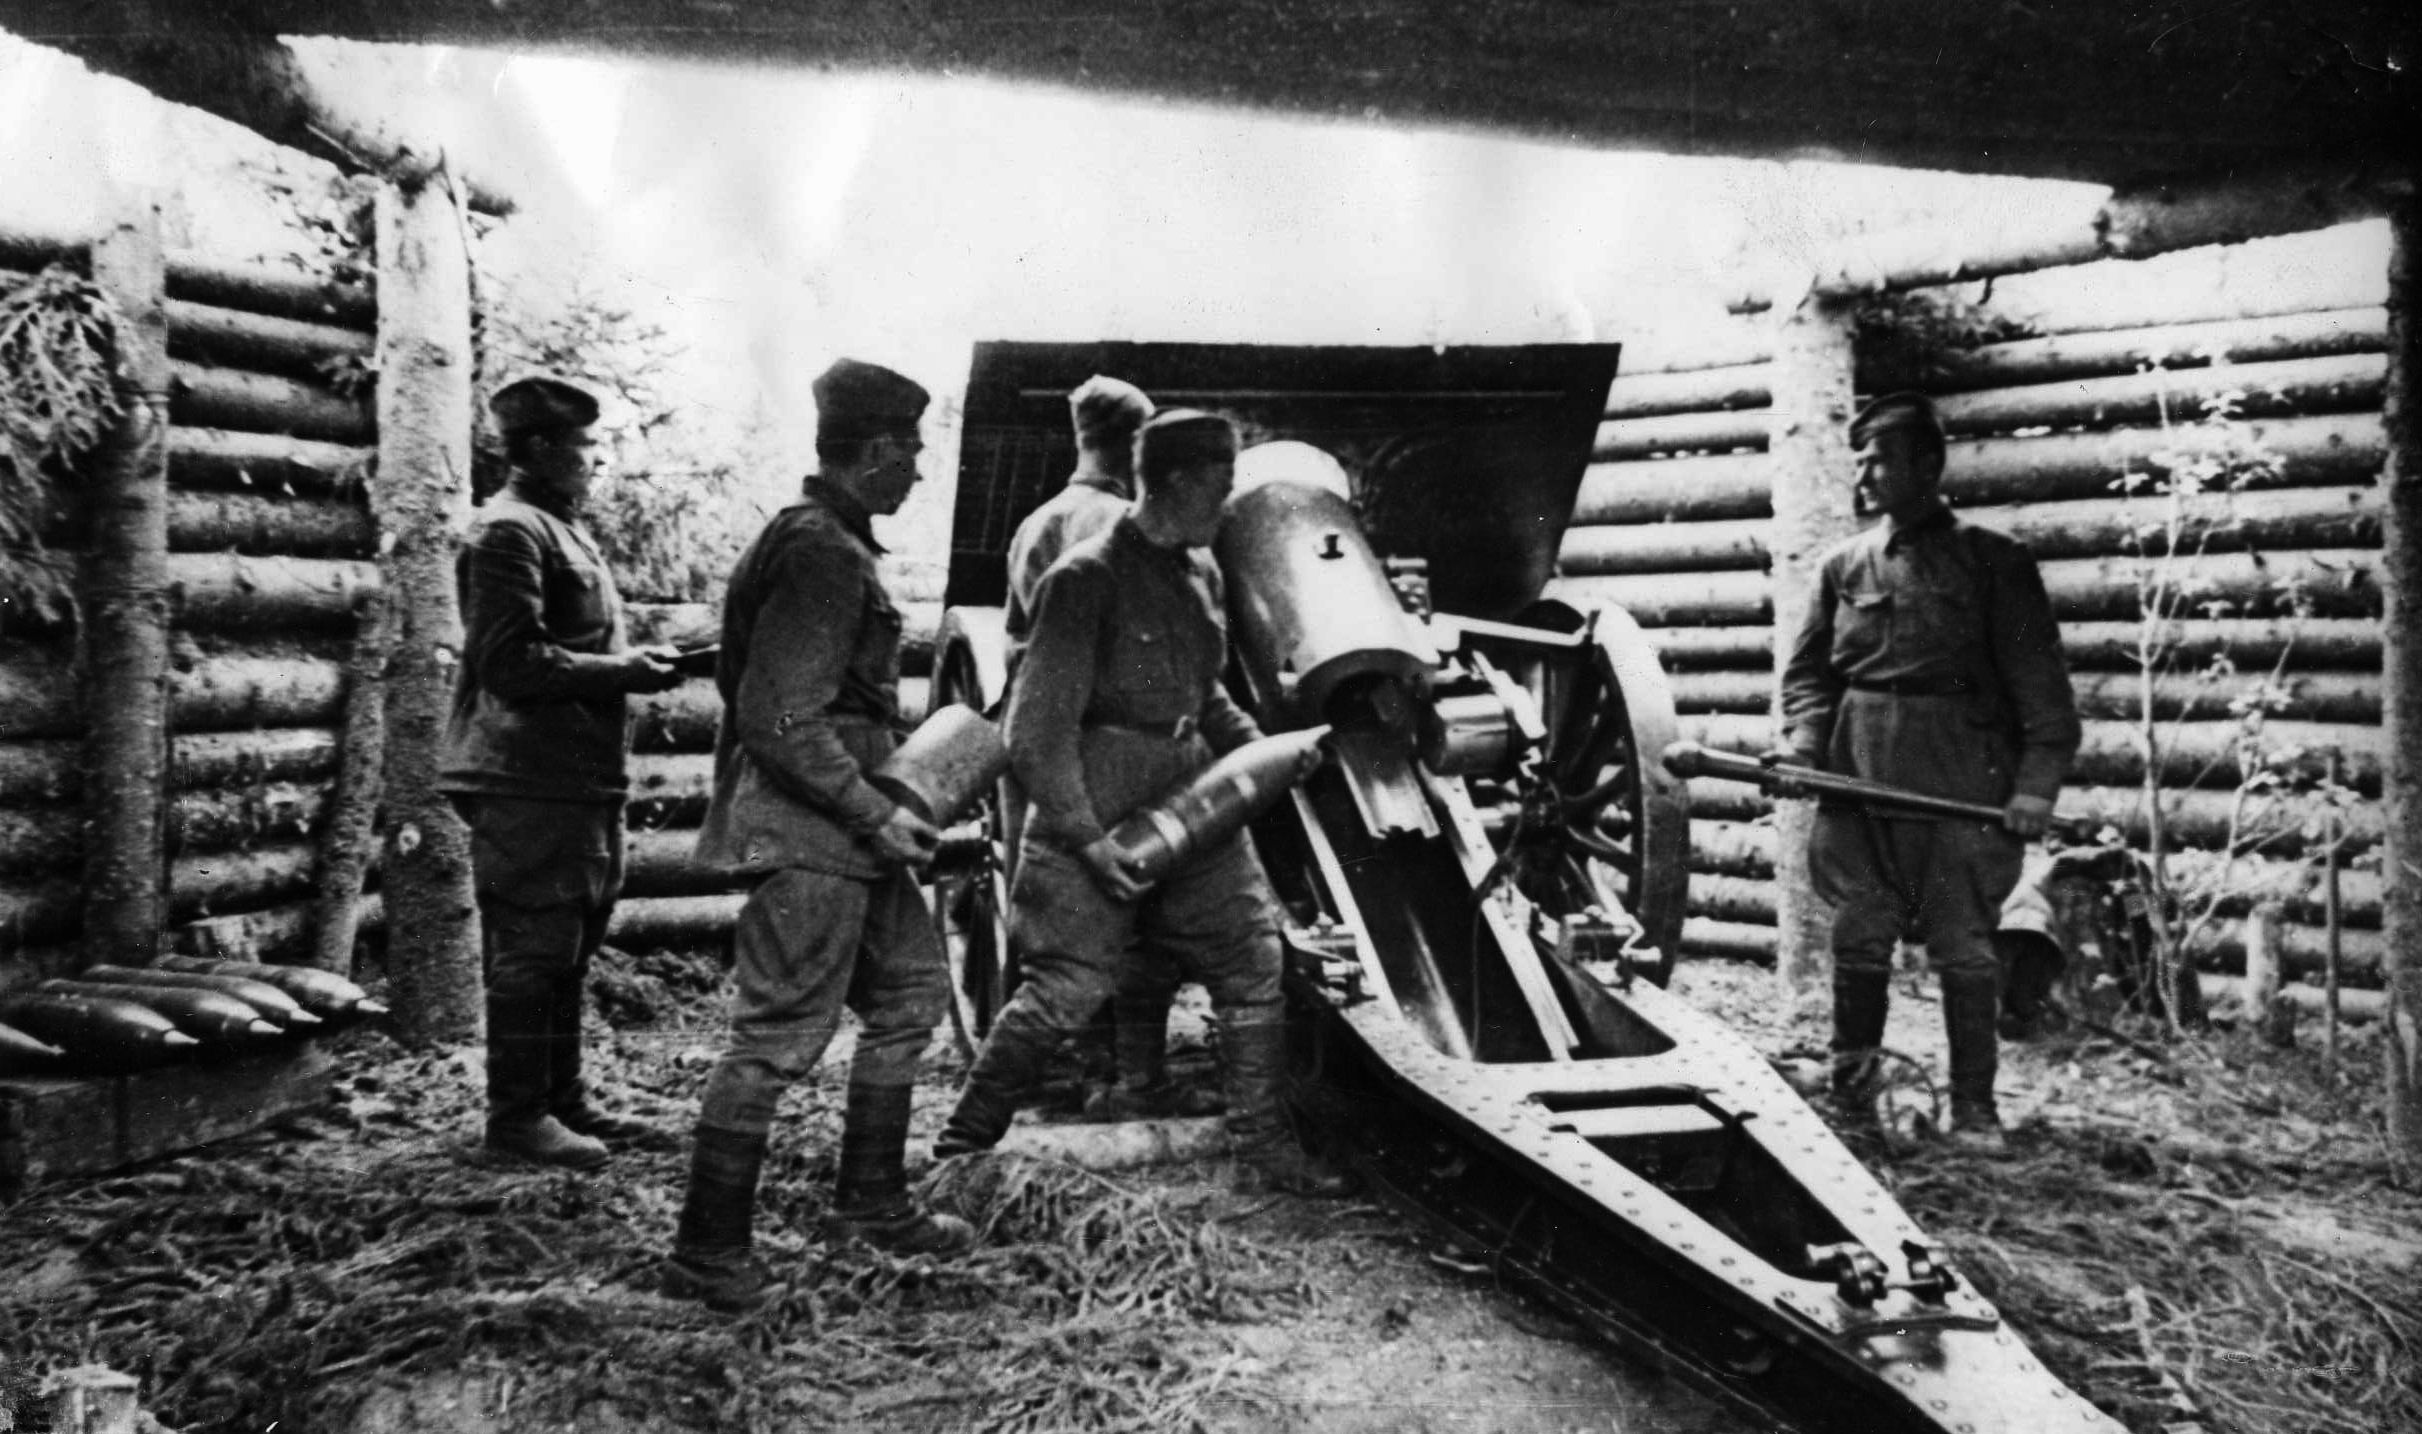 During the warm days of summer 1942, Soviet artillerymen prepare to fire a field artillery piece against German troops intent on renewing offensive operations.